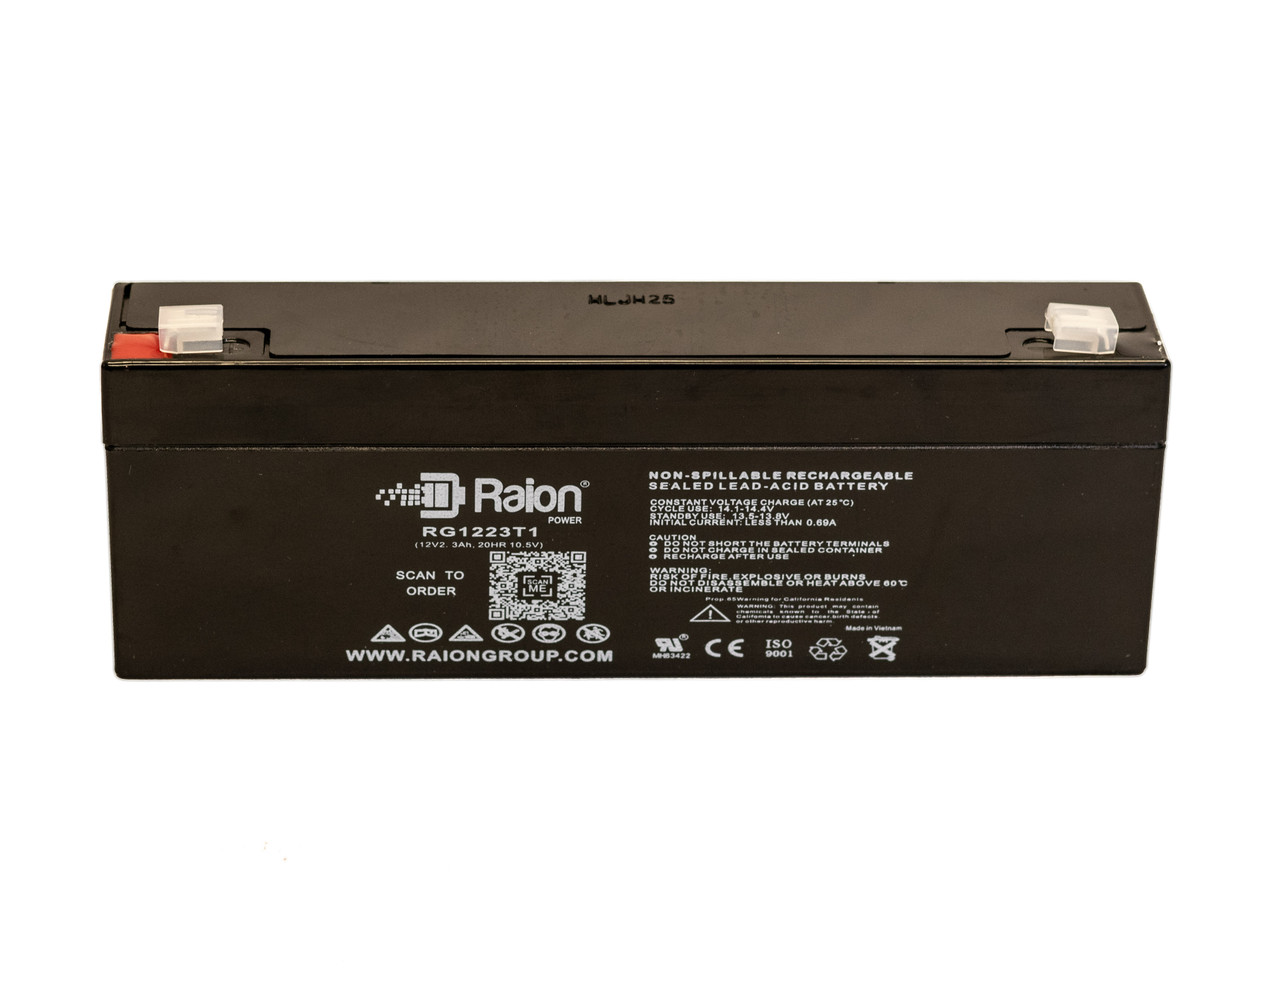 Raion Power 12V 2.3Ah SLA Battery With T1 Terminals For Ivac Medical Systems 3000 KEOFEED